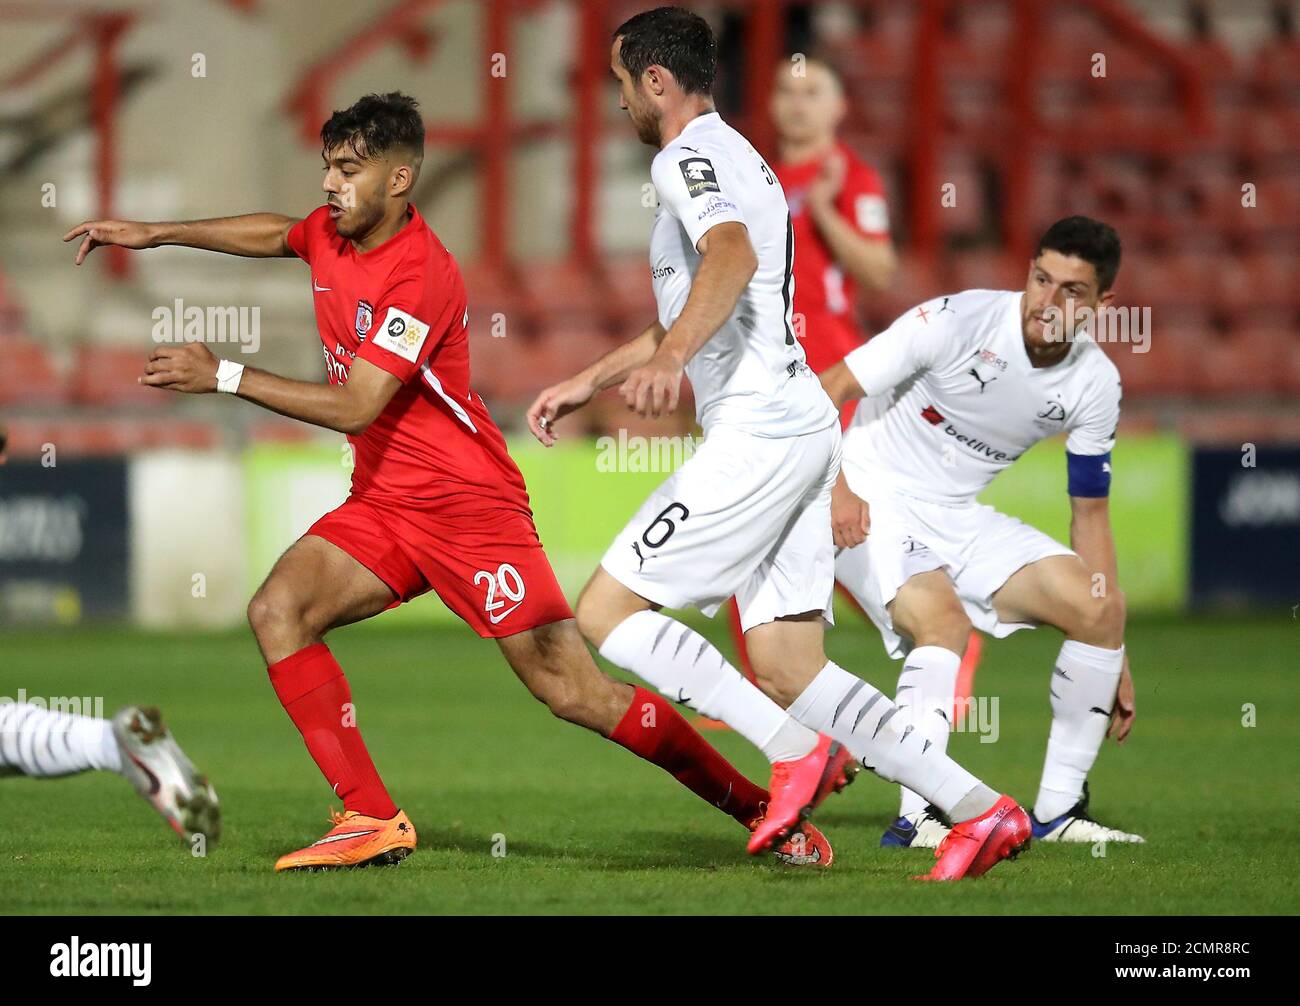 Connah's Quay Nomads' Sameron Singh-Dool (left) and Dinamo Tbilisi's Bakar Kardava battle for the ball during the UEFA Europa League, Second Qualifying Round match at the Racecourse Ground, Wrexham. Stock Photo